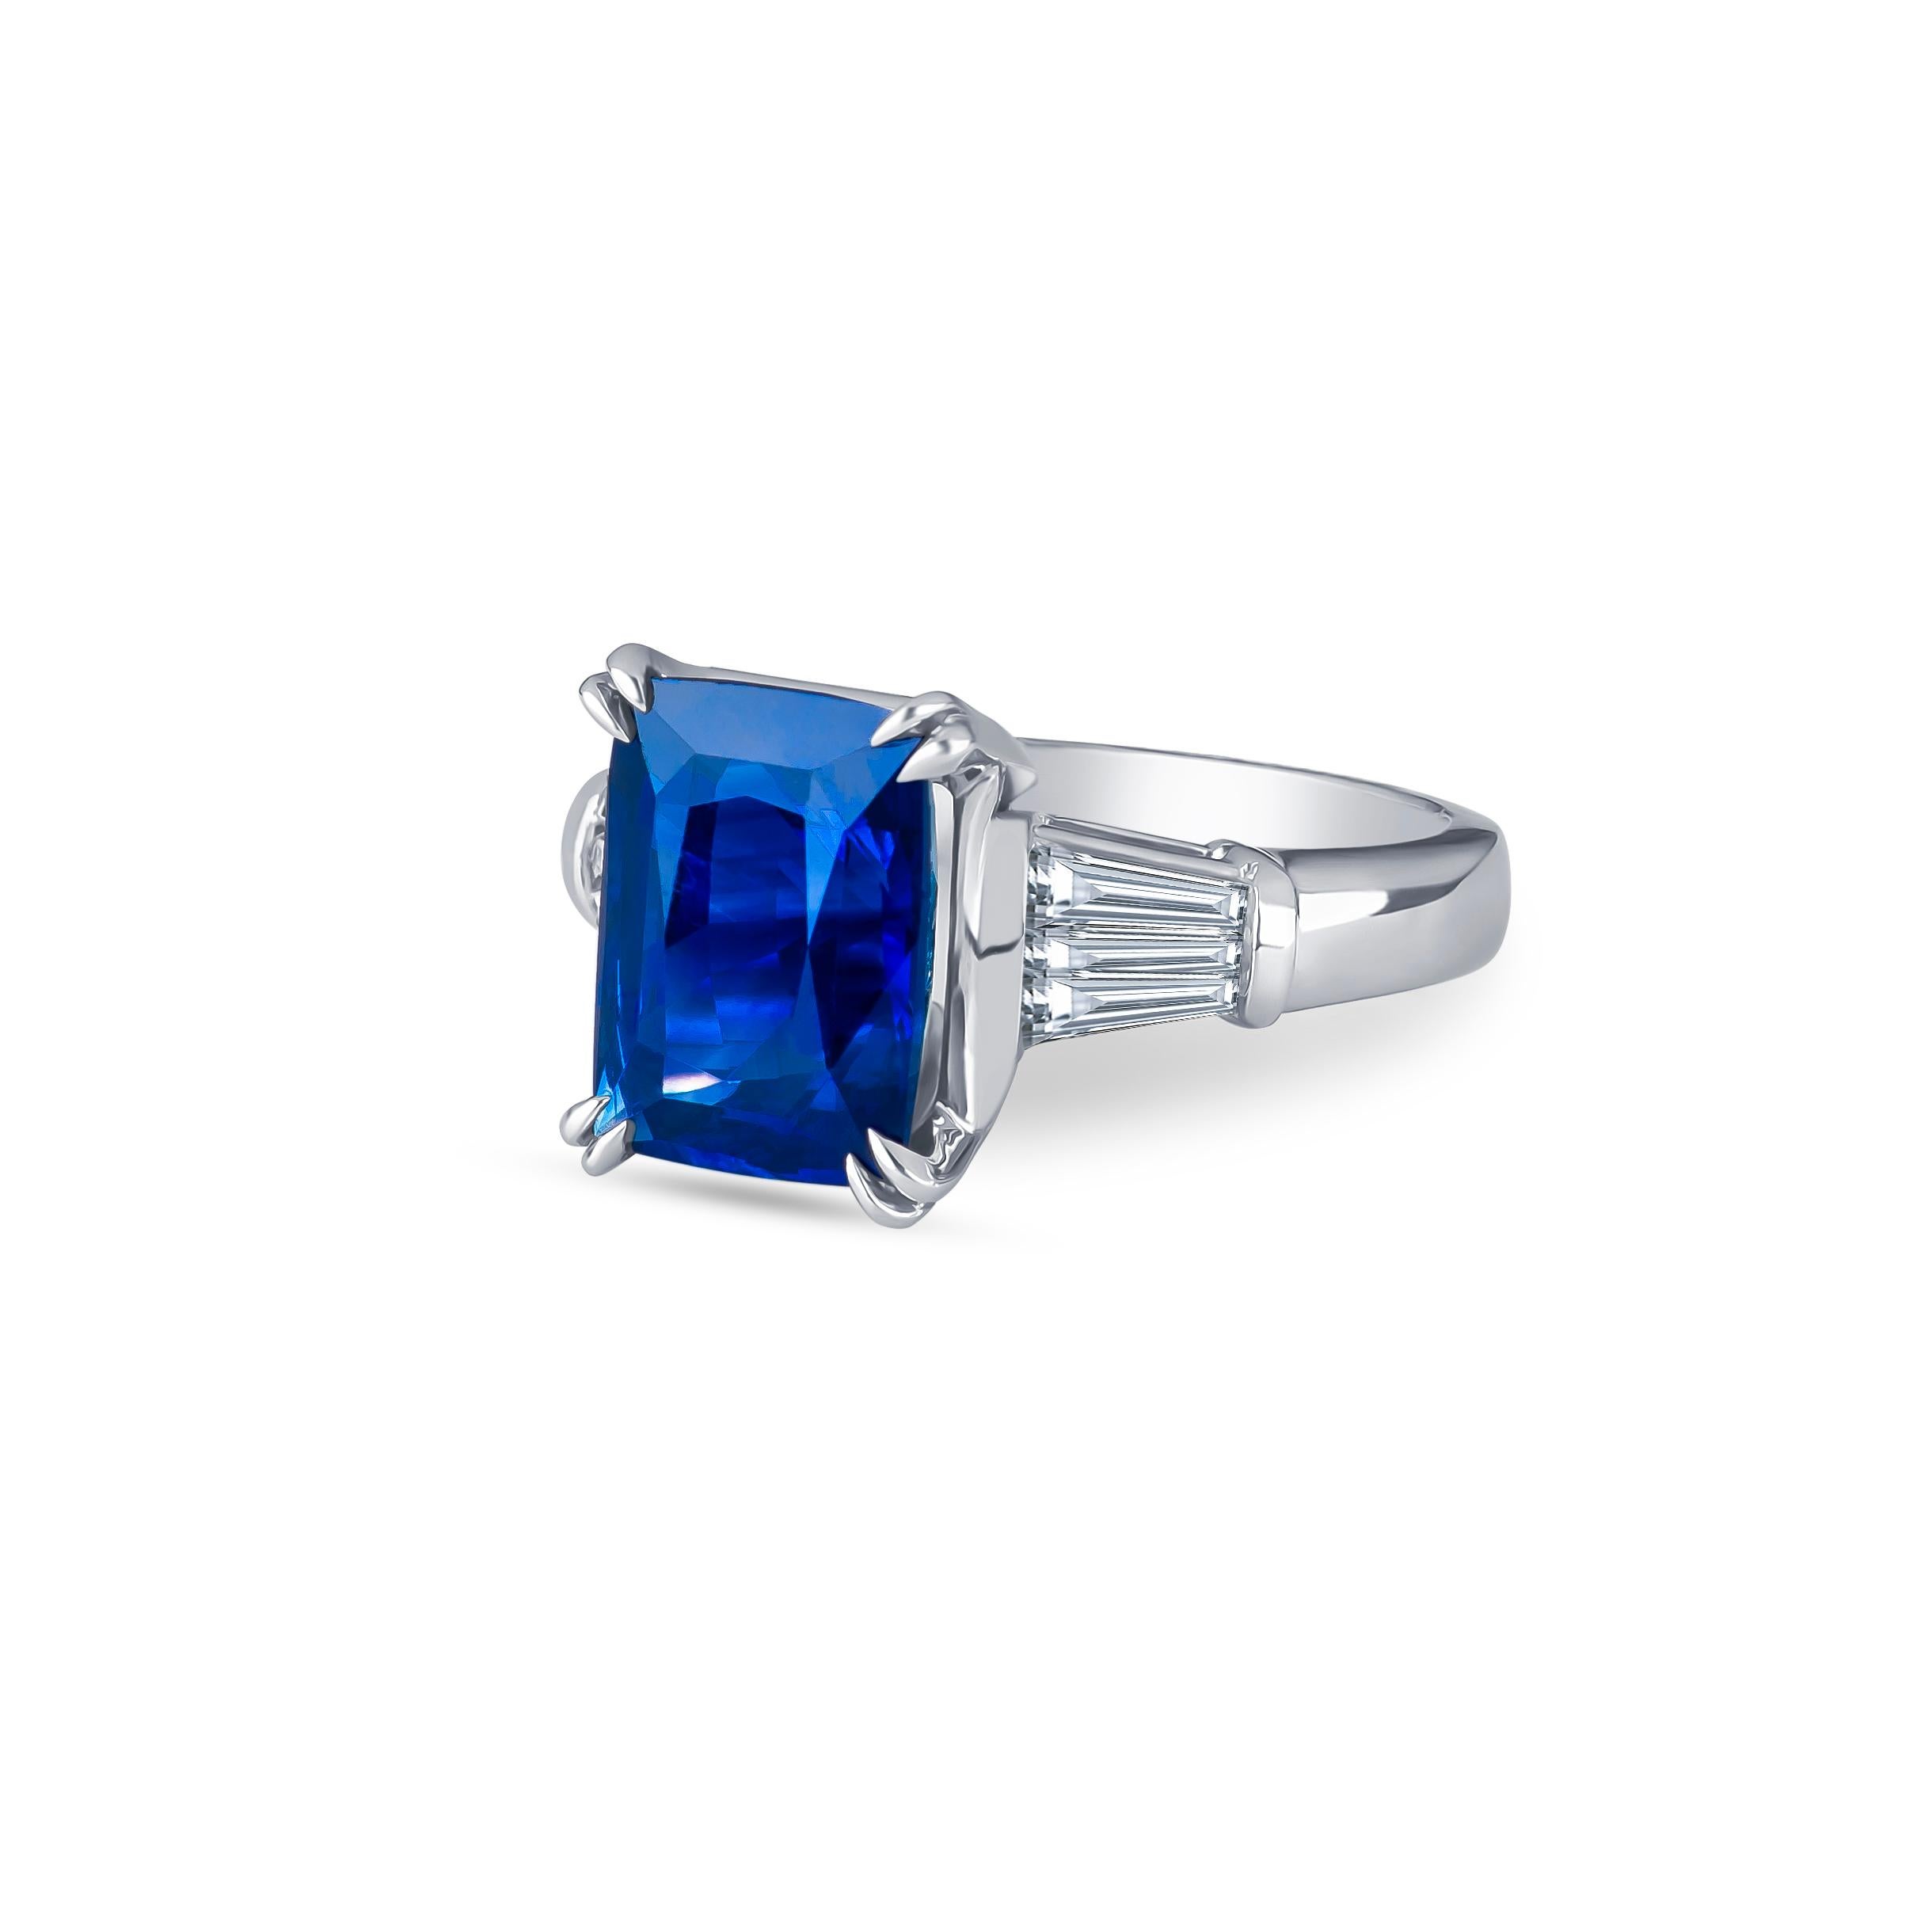 5.96 Carat Natural Ceylon blue sapphire (AGL certified) cushion cut with 0.80 carat total weight in baguette diamonds, set in a platinum ring. Ring size 6, may be sized larger or smaller upon request.